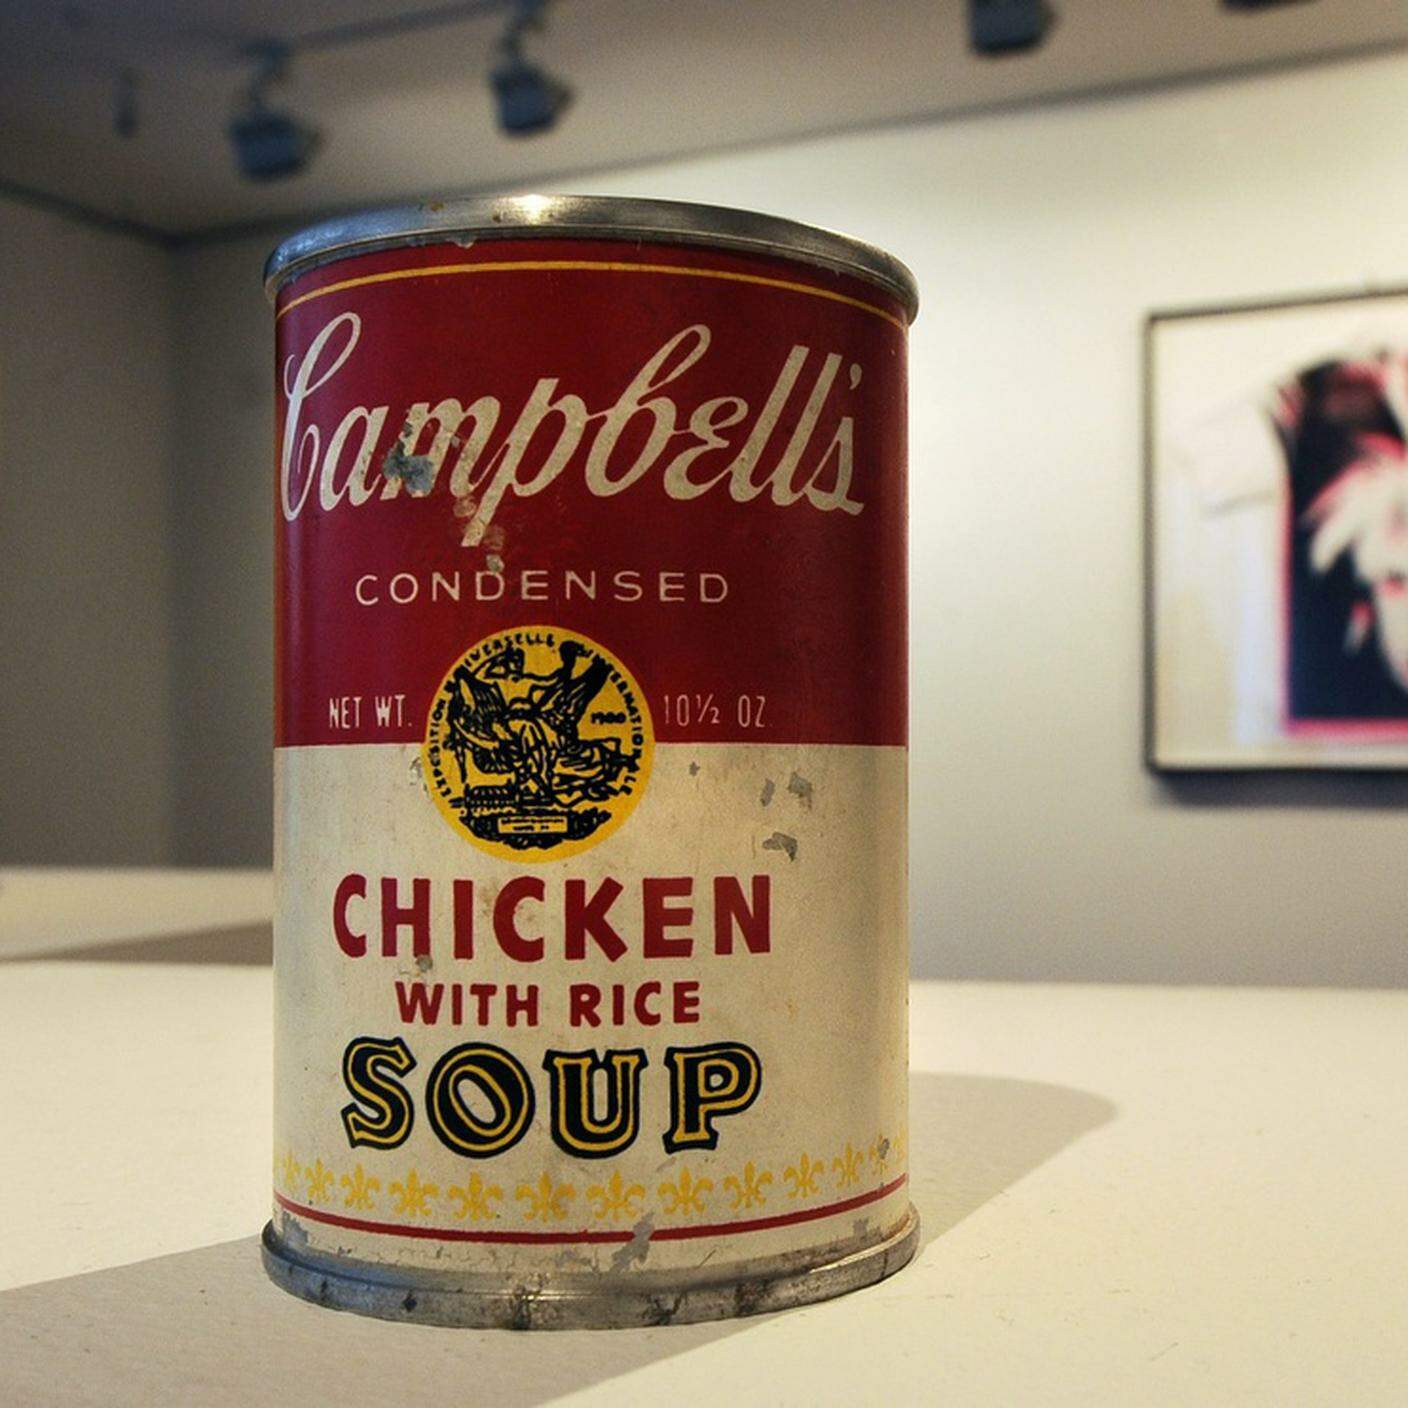 Andy Warhol, "Campbell’s Soup"